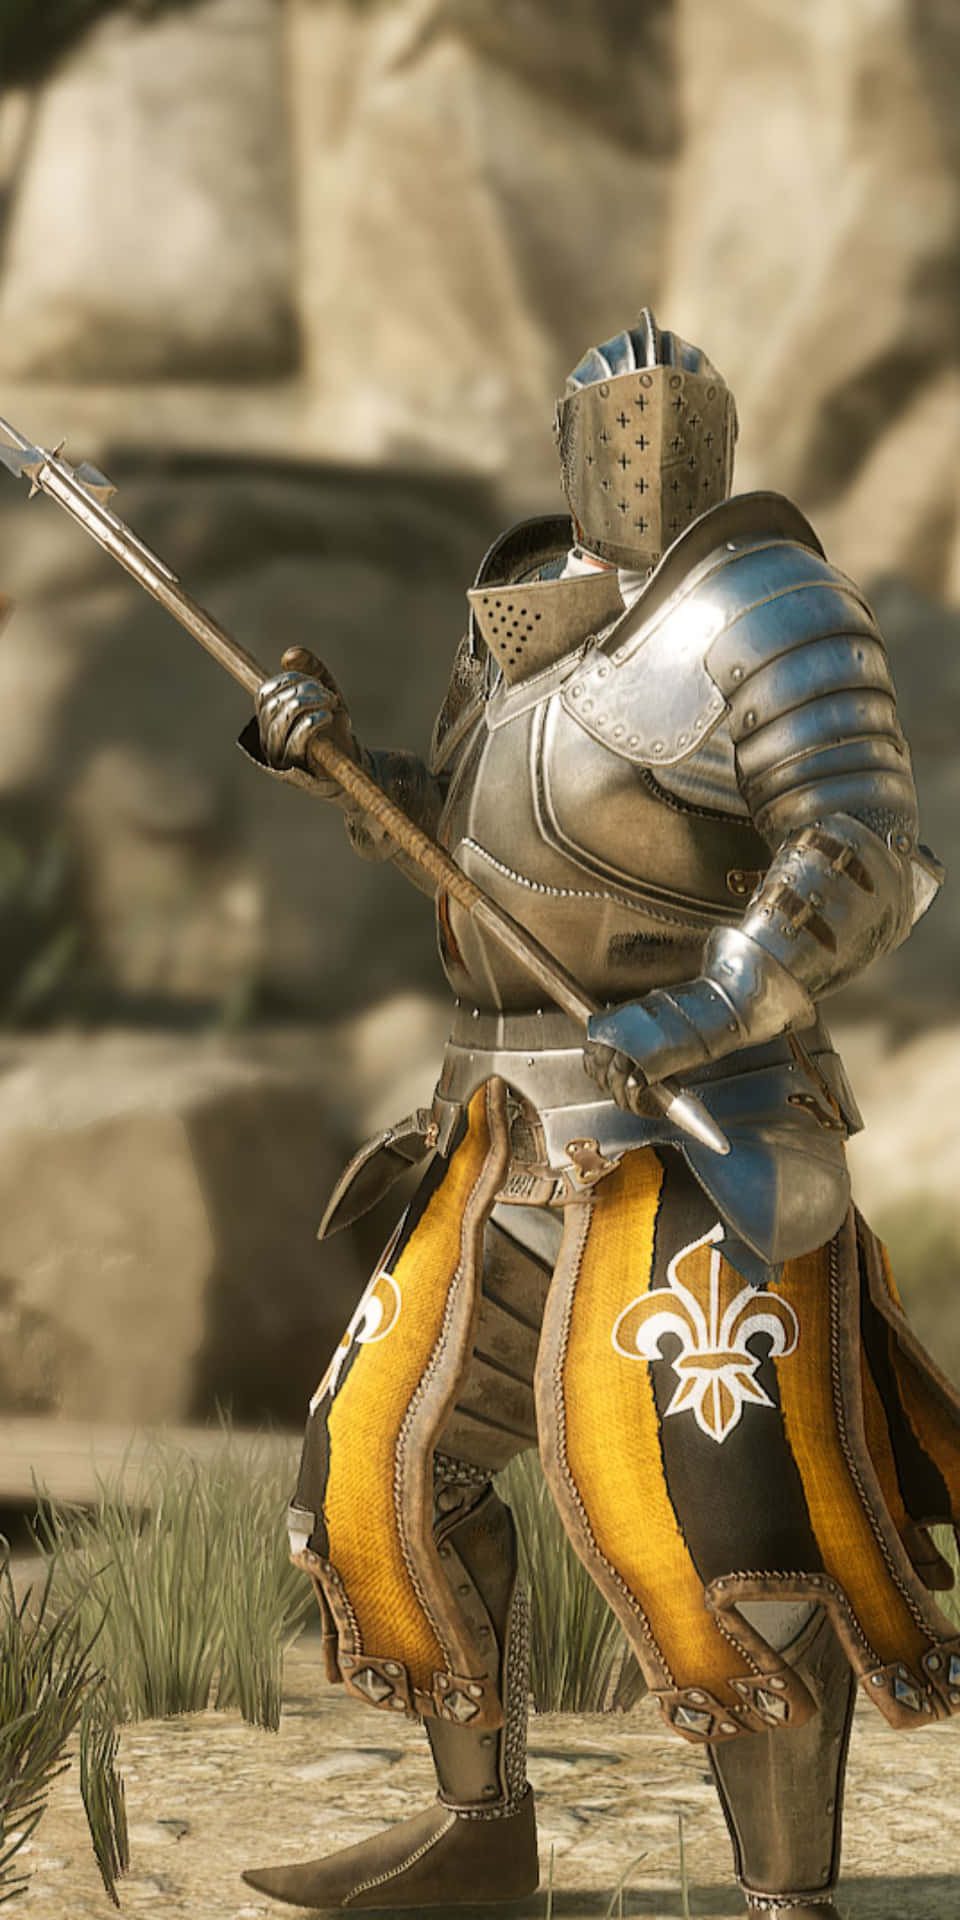 A Knight In Armor Is Holding A Sword